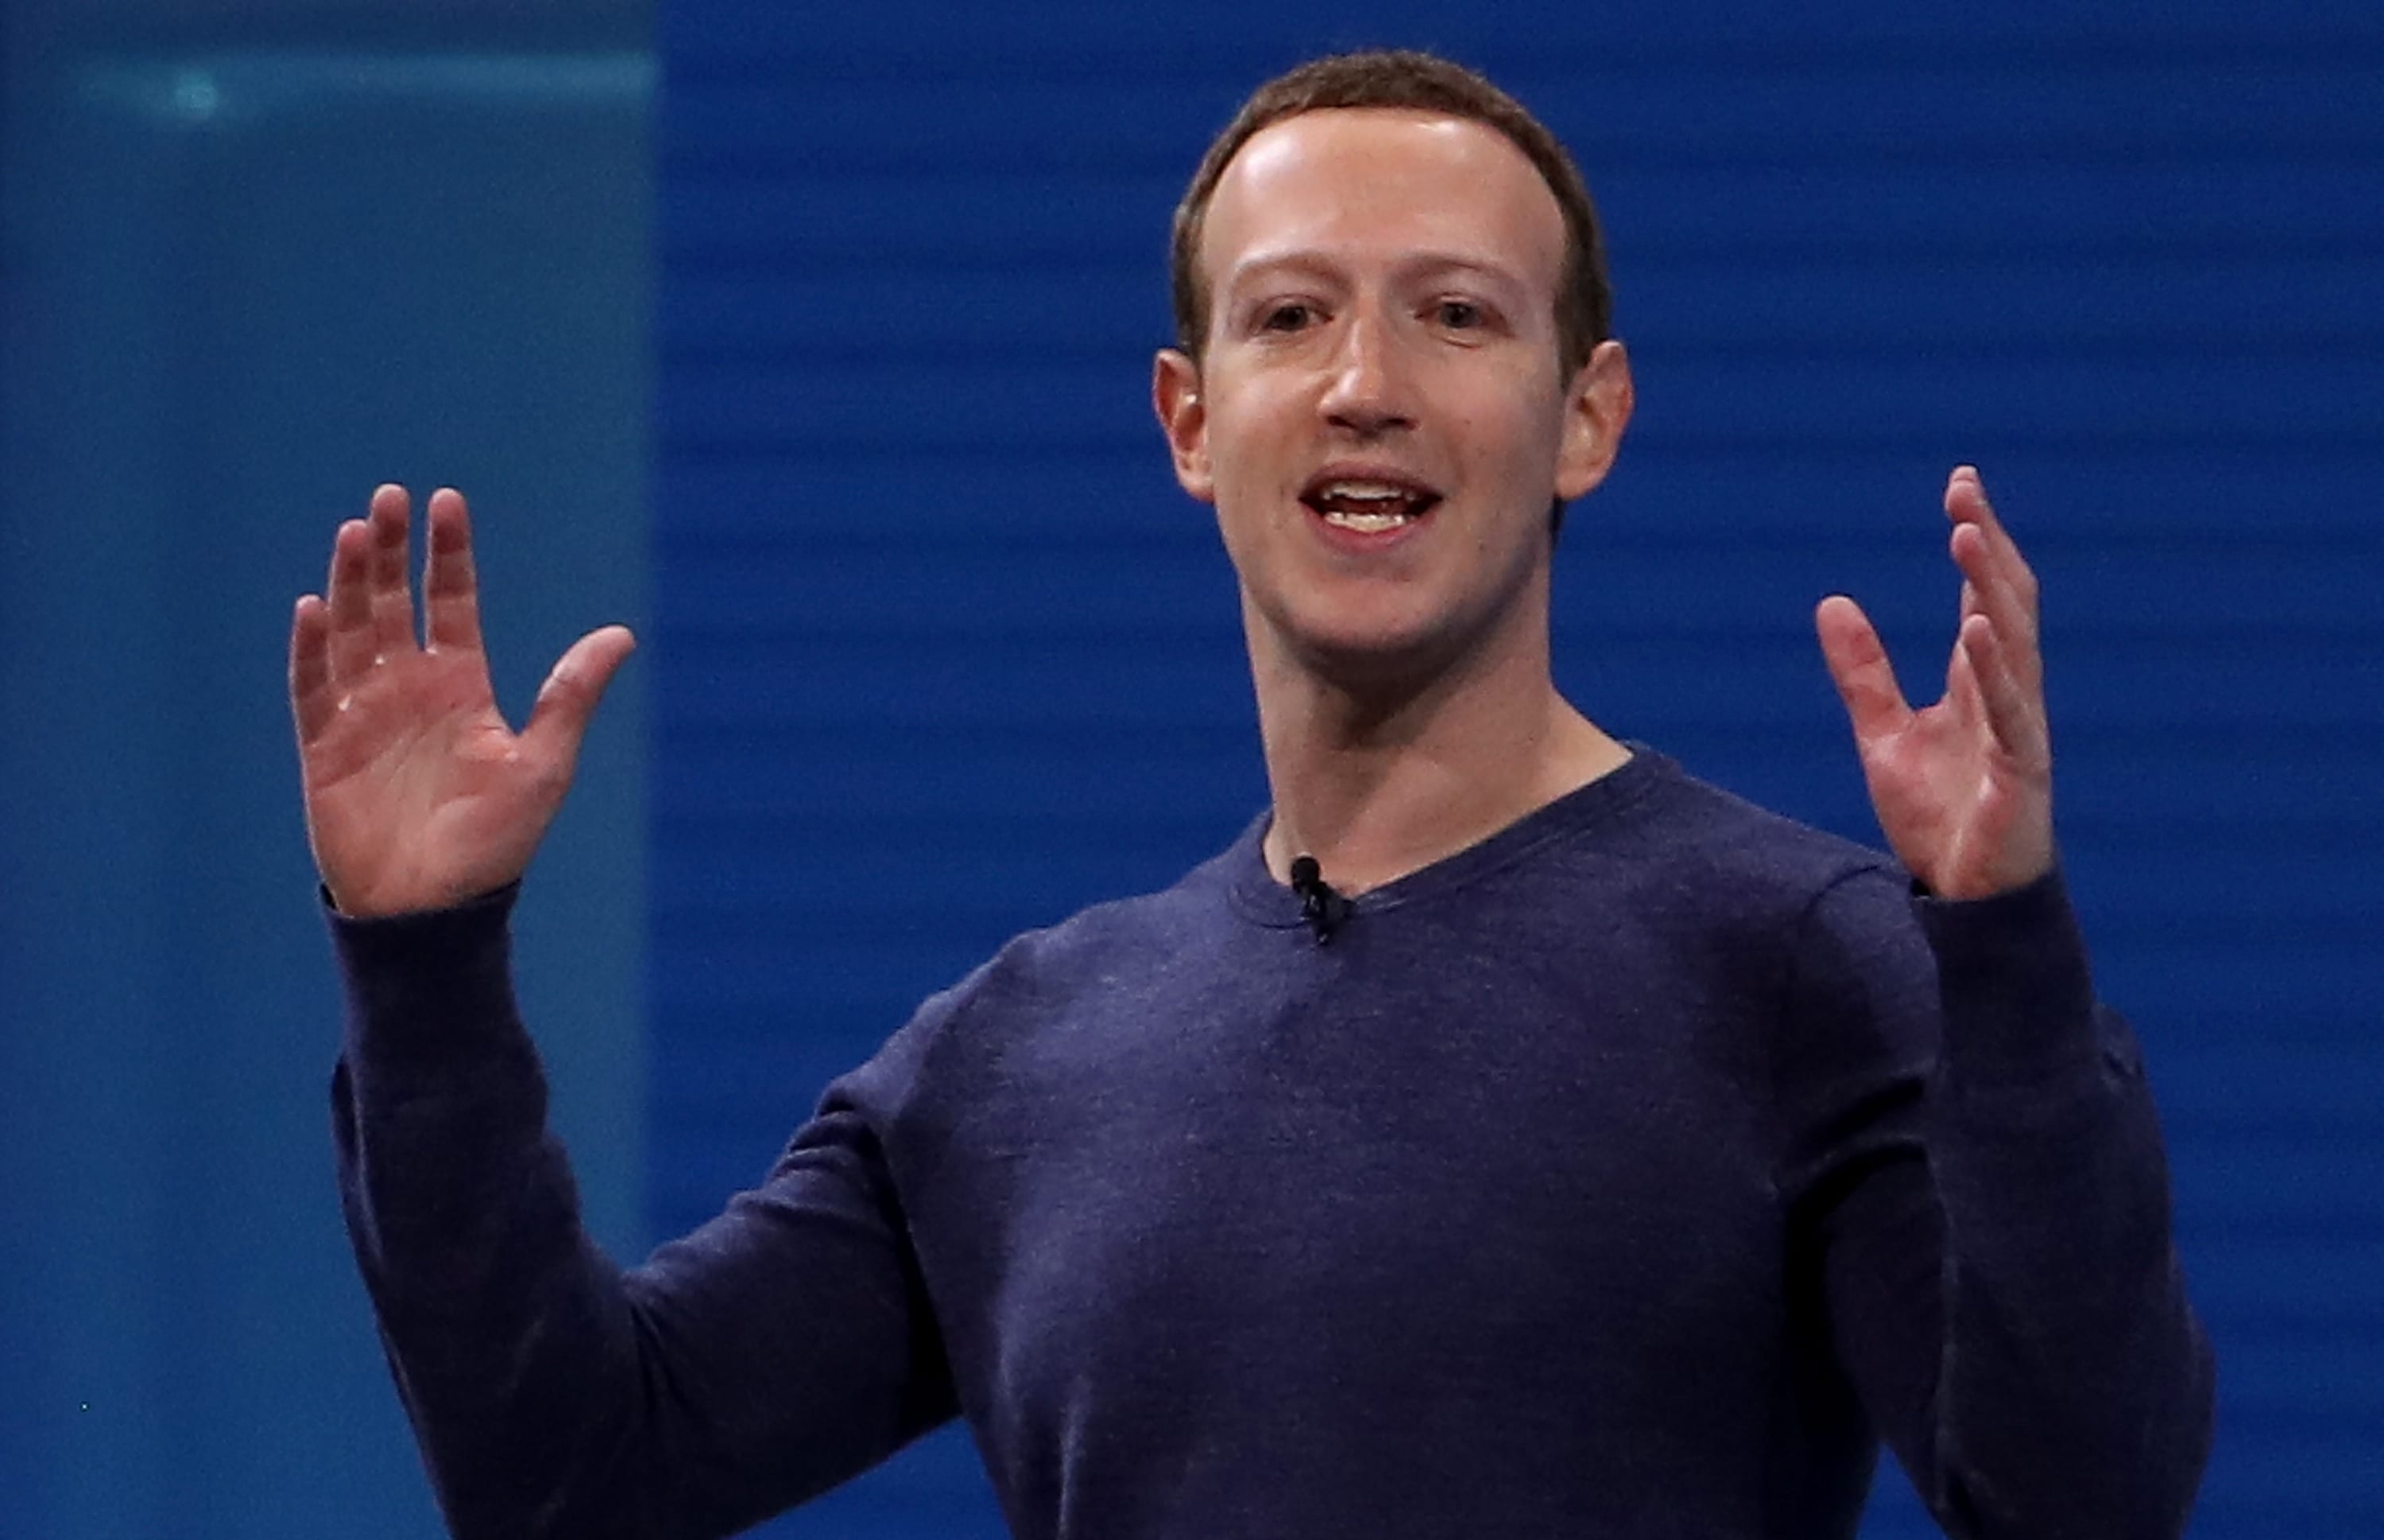 Facebook CEO Mark Zuckerberg speaking during the F8 Facebook Developers conference in San Jose, California.